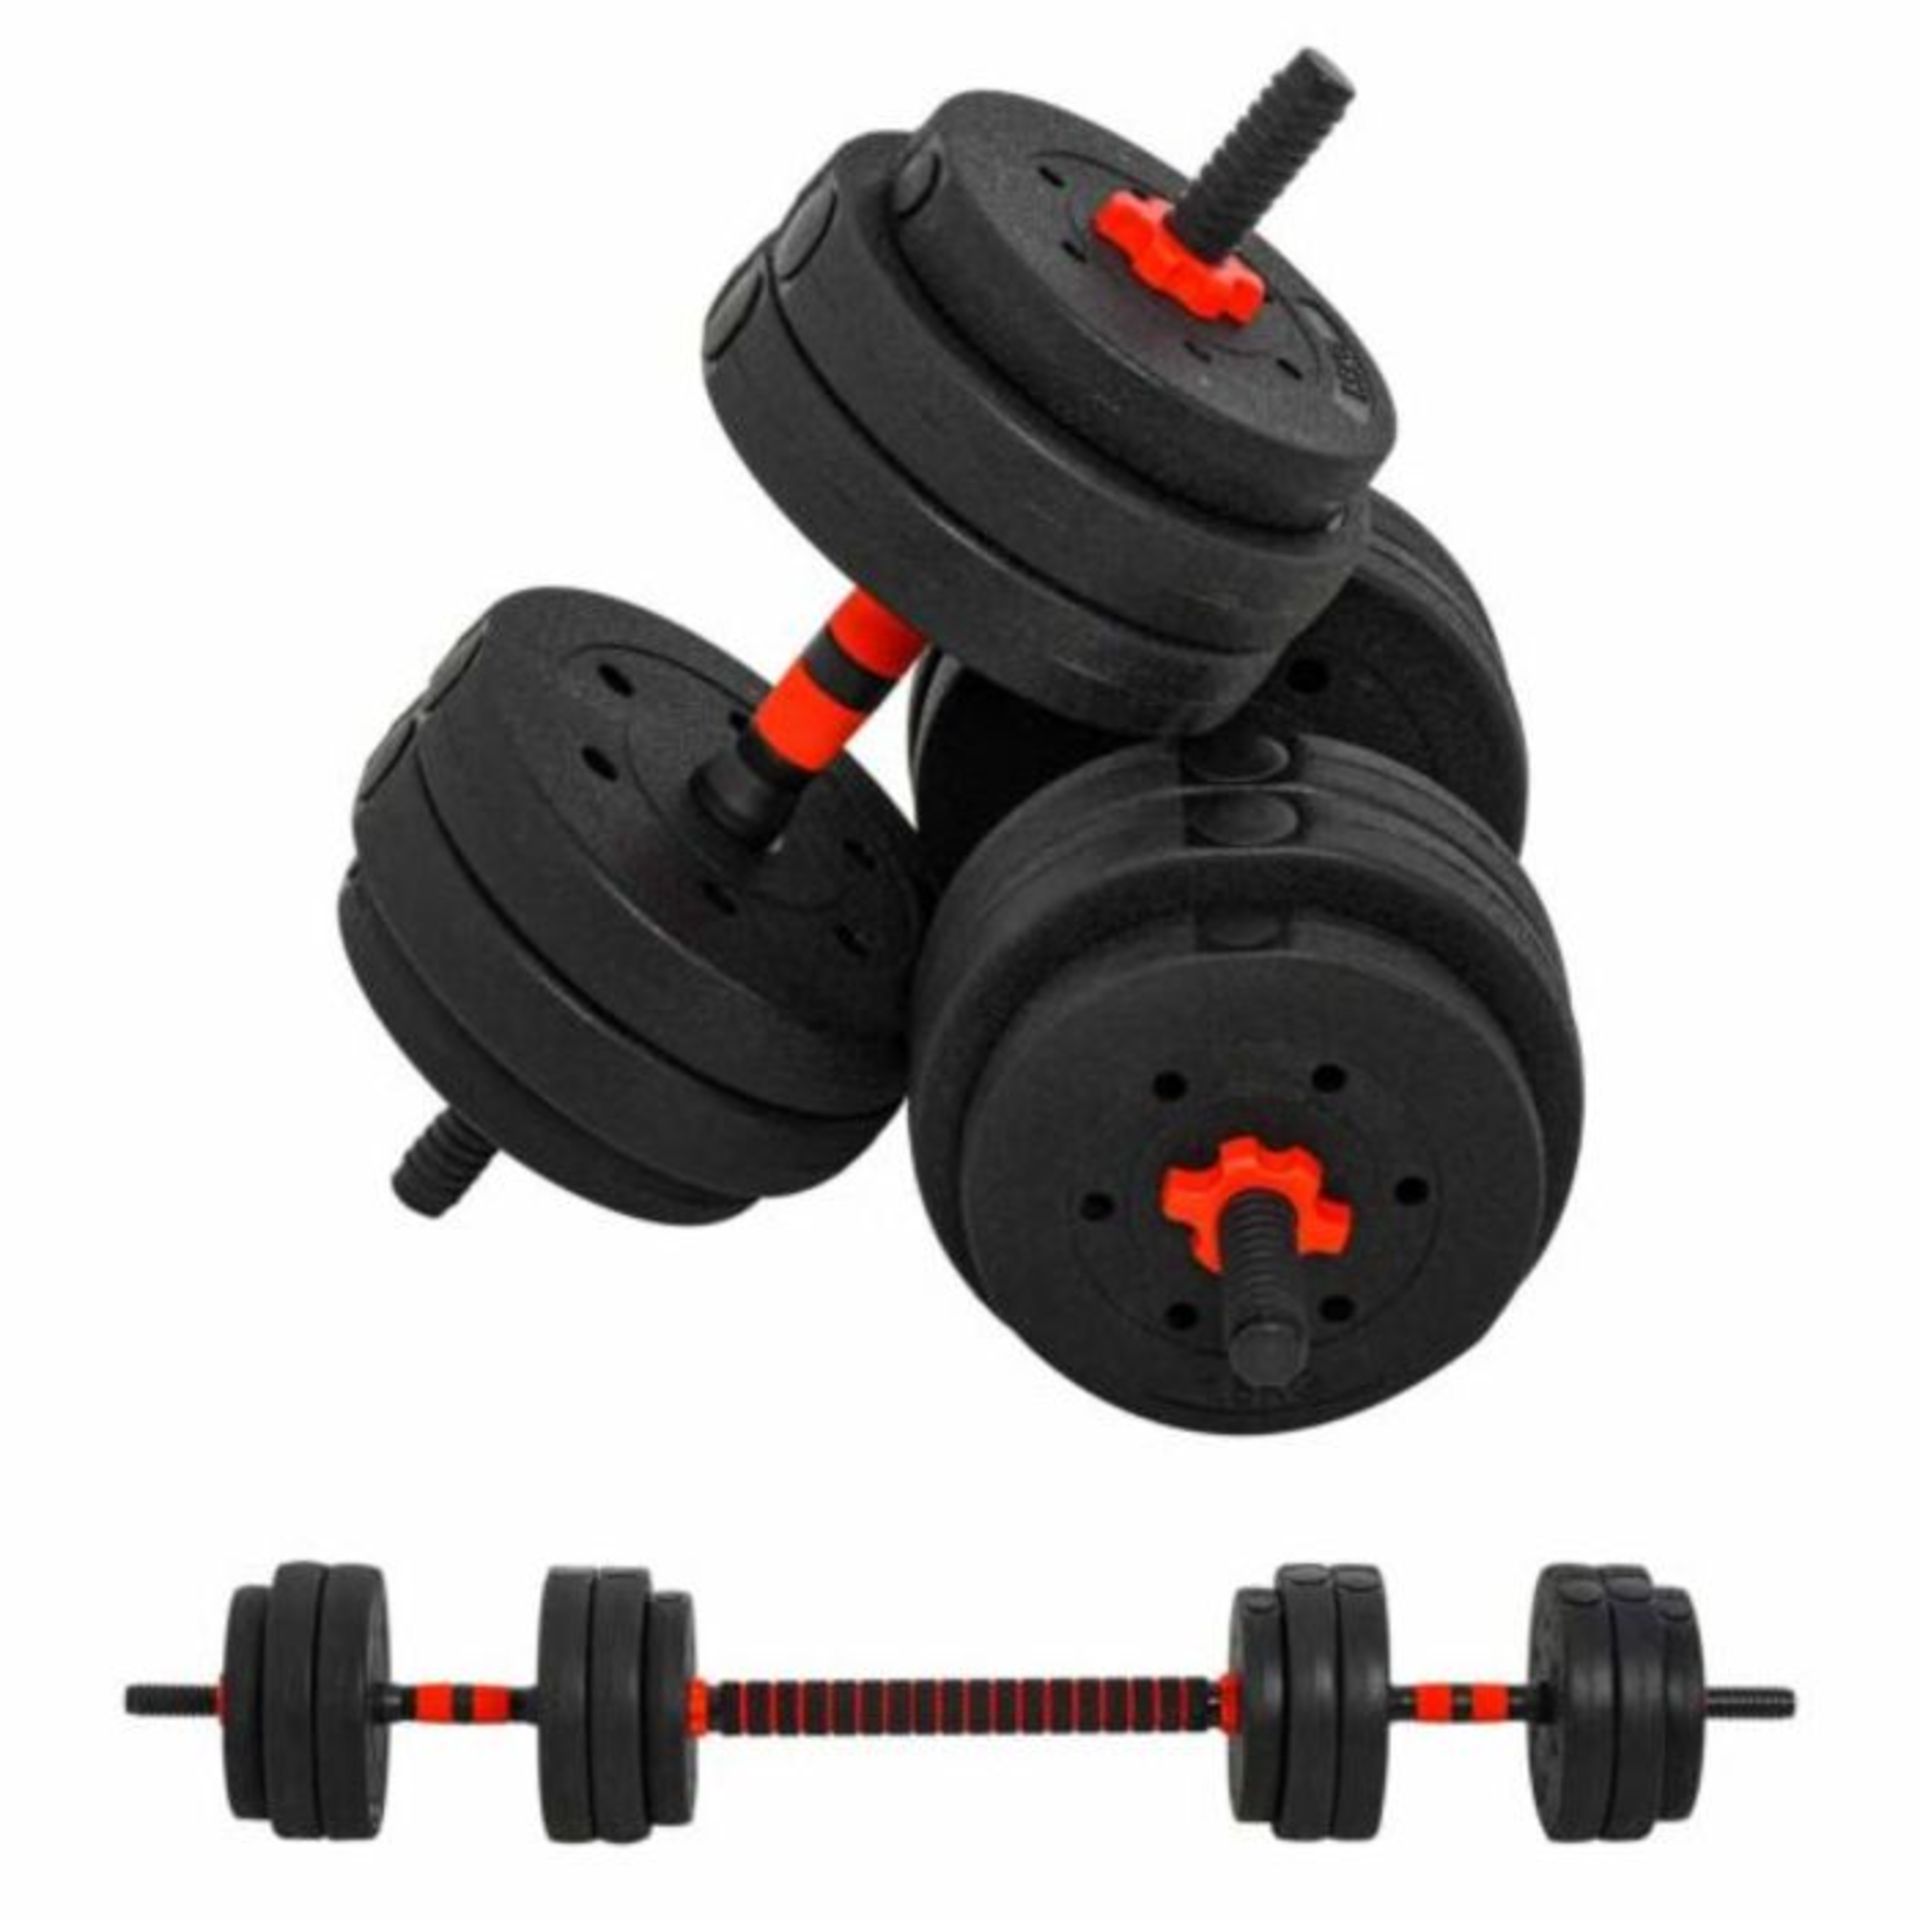 10x Hom Com 2 in1 Barbell/Dumb bell 30kg weight set, new and boxed, Similar sets retail at around